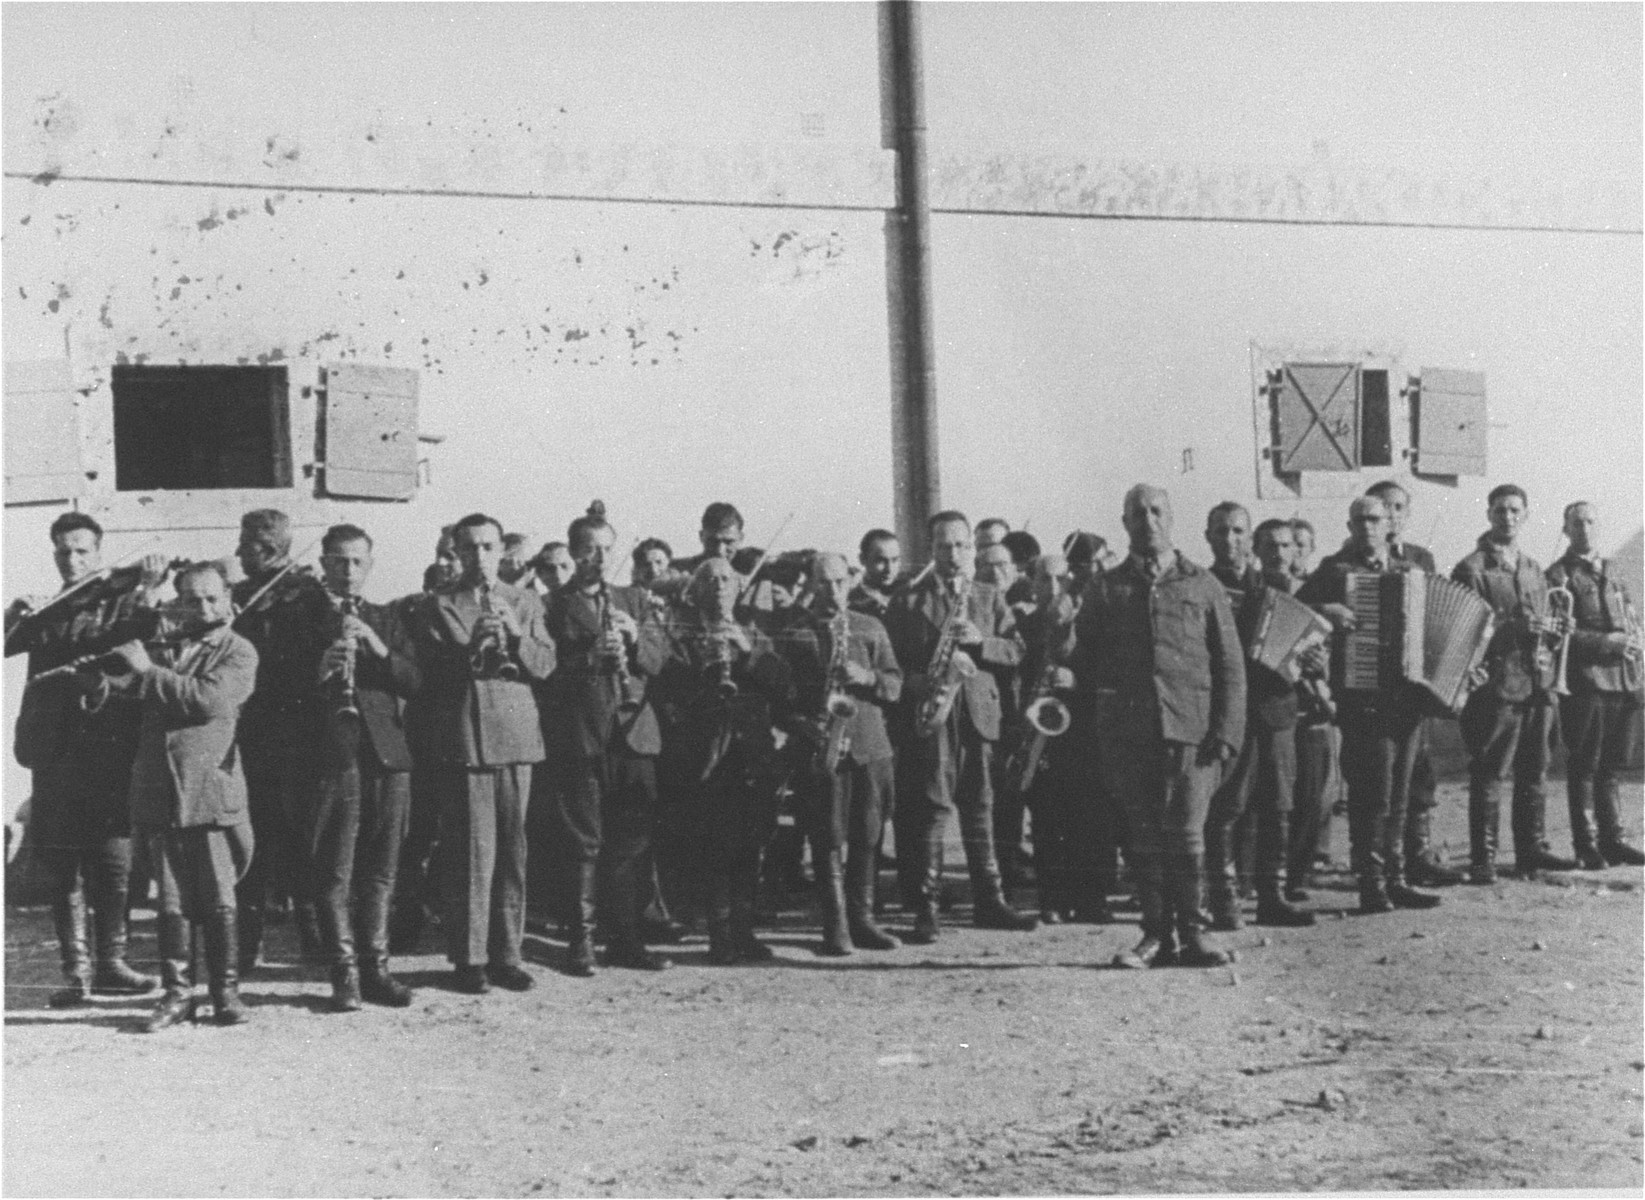 Members of the camp orchestra perform in front of a barracks in the Janowska concentration camp.

The Janowska orchestra included some of the leading Jewish musicians in Lvov, among them violinist Leonid Stricks and cellist Leon Eber.  The SS forced the orchestra to perform during selections and actions and even "commissioned" a special composition to be played on these occasions.  Entitled "Todestango" [Tango of Death], the piece was composed by Yakub Munt (sp?), former director of the Lvov opera.  The music was based on an earlier work by Eduardo Bianco.  The members of the orchestra met their end in 1943 when they were shot to death by their overseers while playing their instruments.